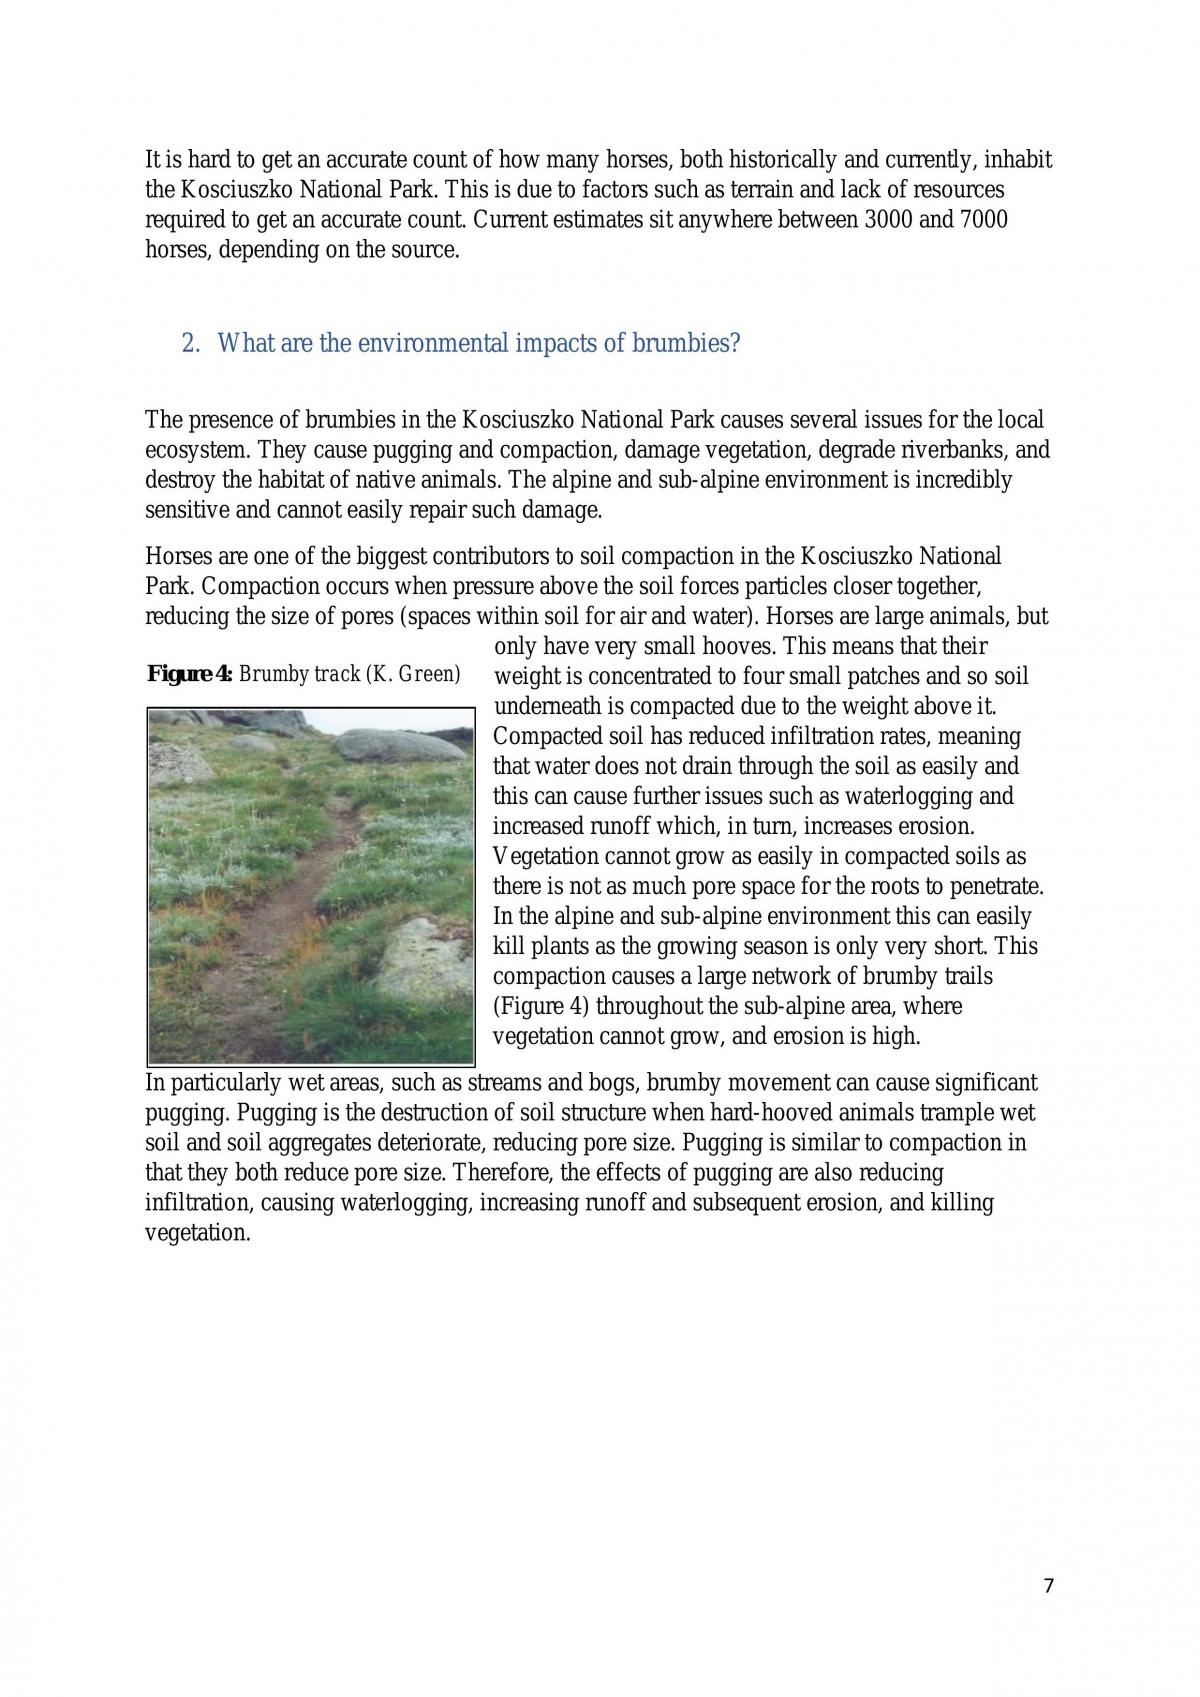 SGP: The Impact and Management of Brumbies in the Kosciuszkco National Park - Page 7